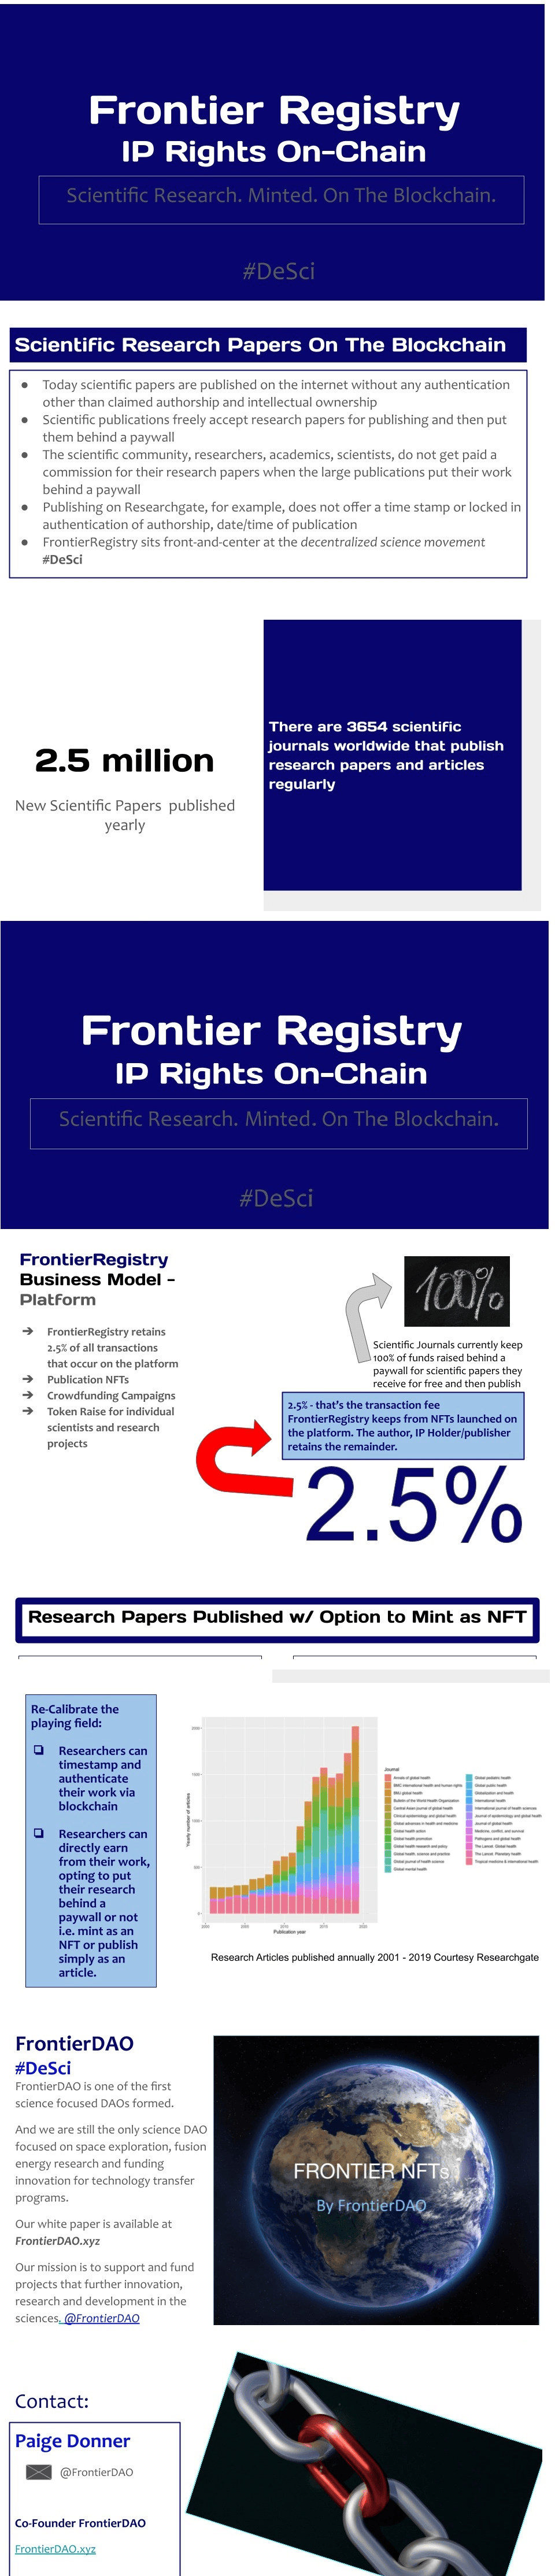 FrontierRegistry - IP Rights On-chain 